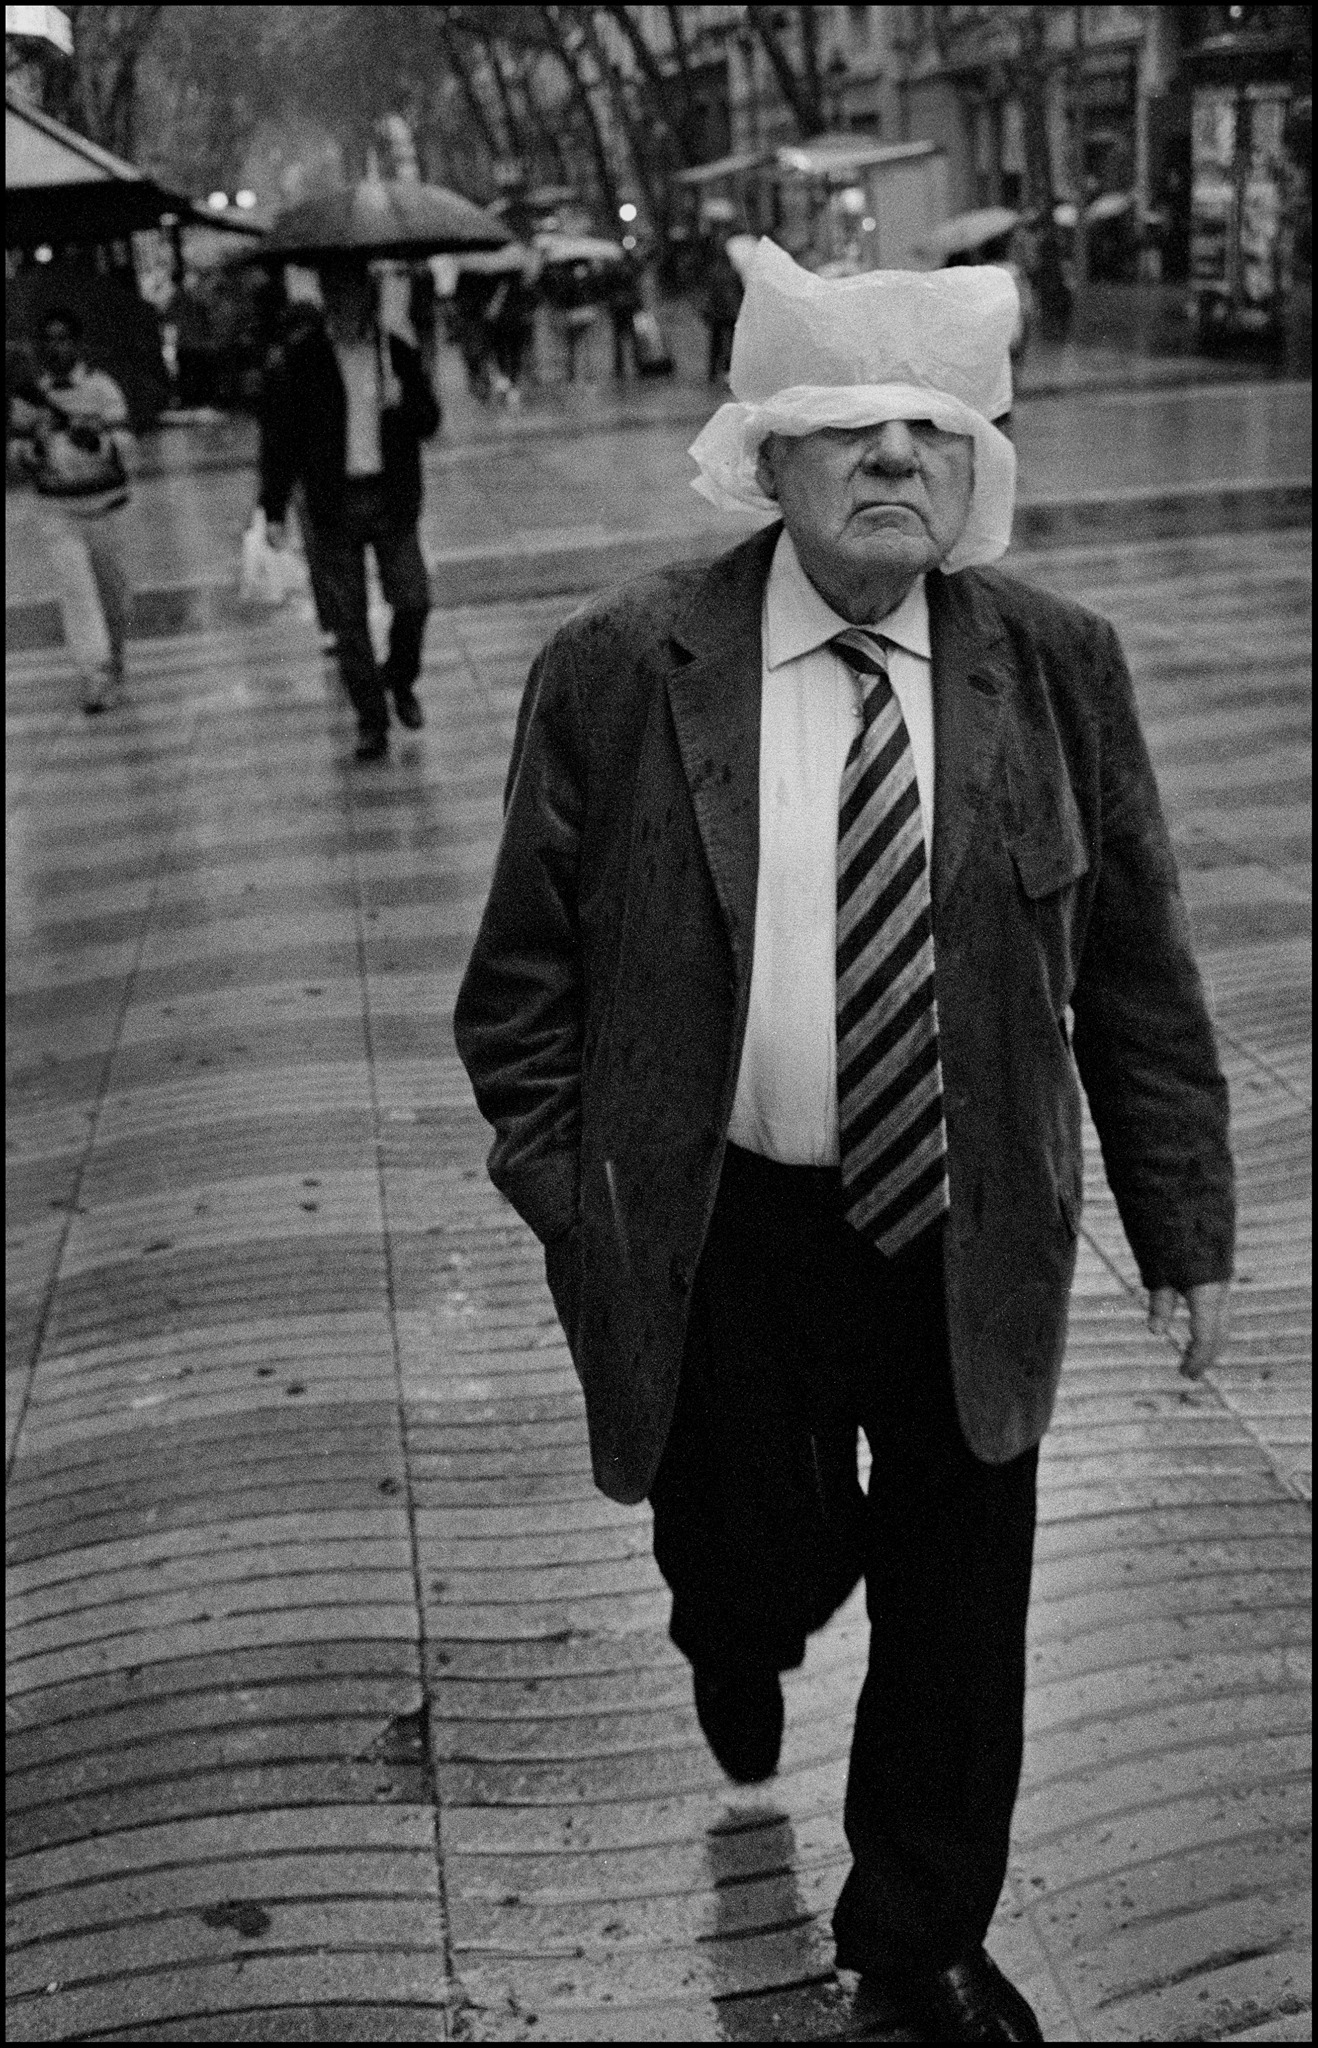 “Bad Weather” Street Photography Assignment Winner: Julian Furones from Spain